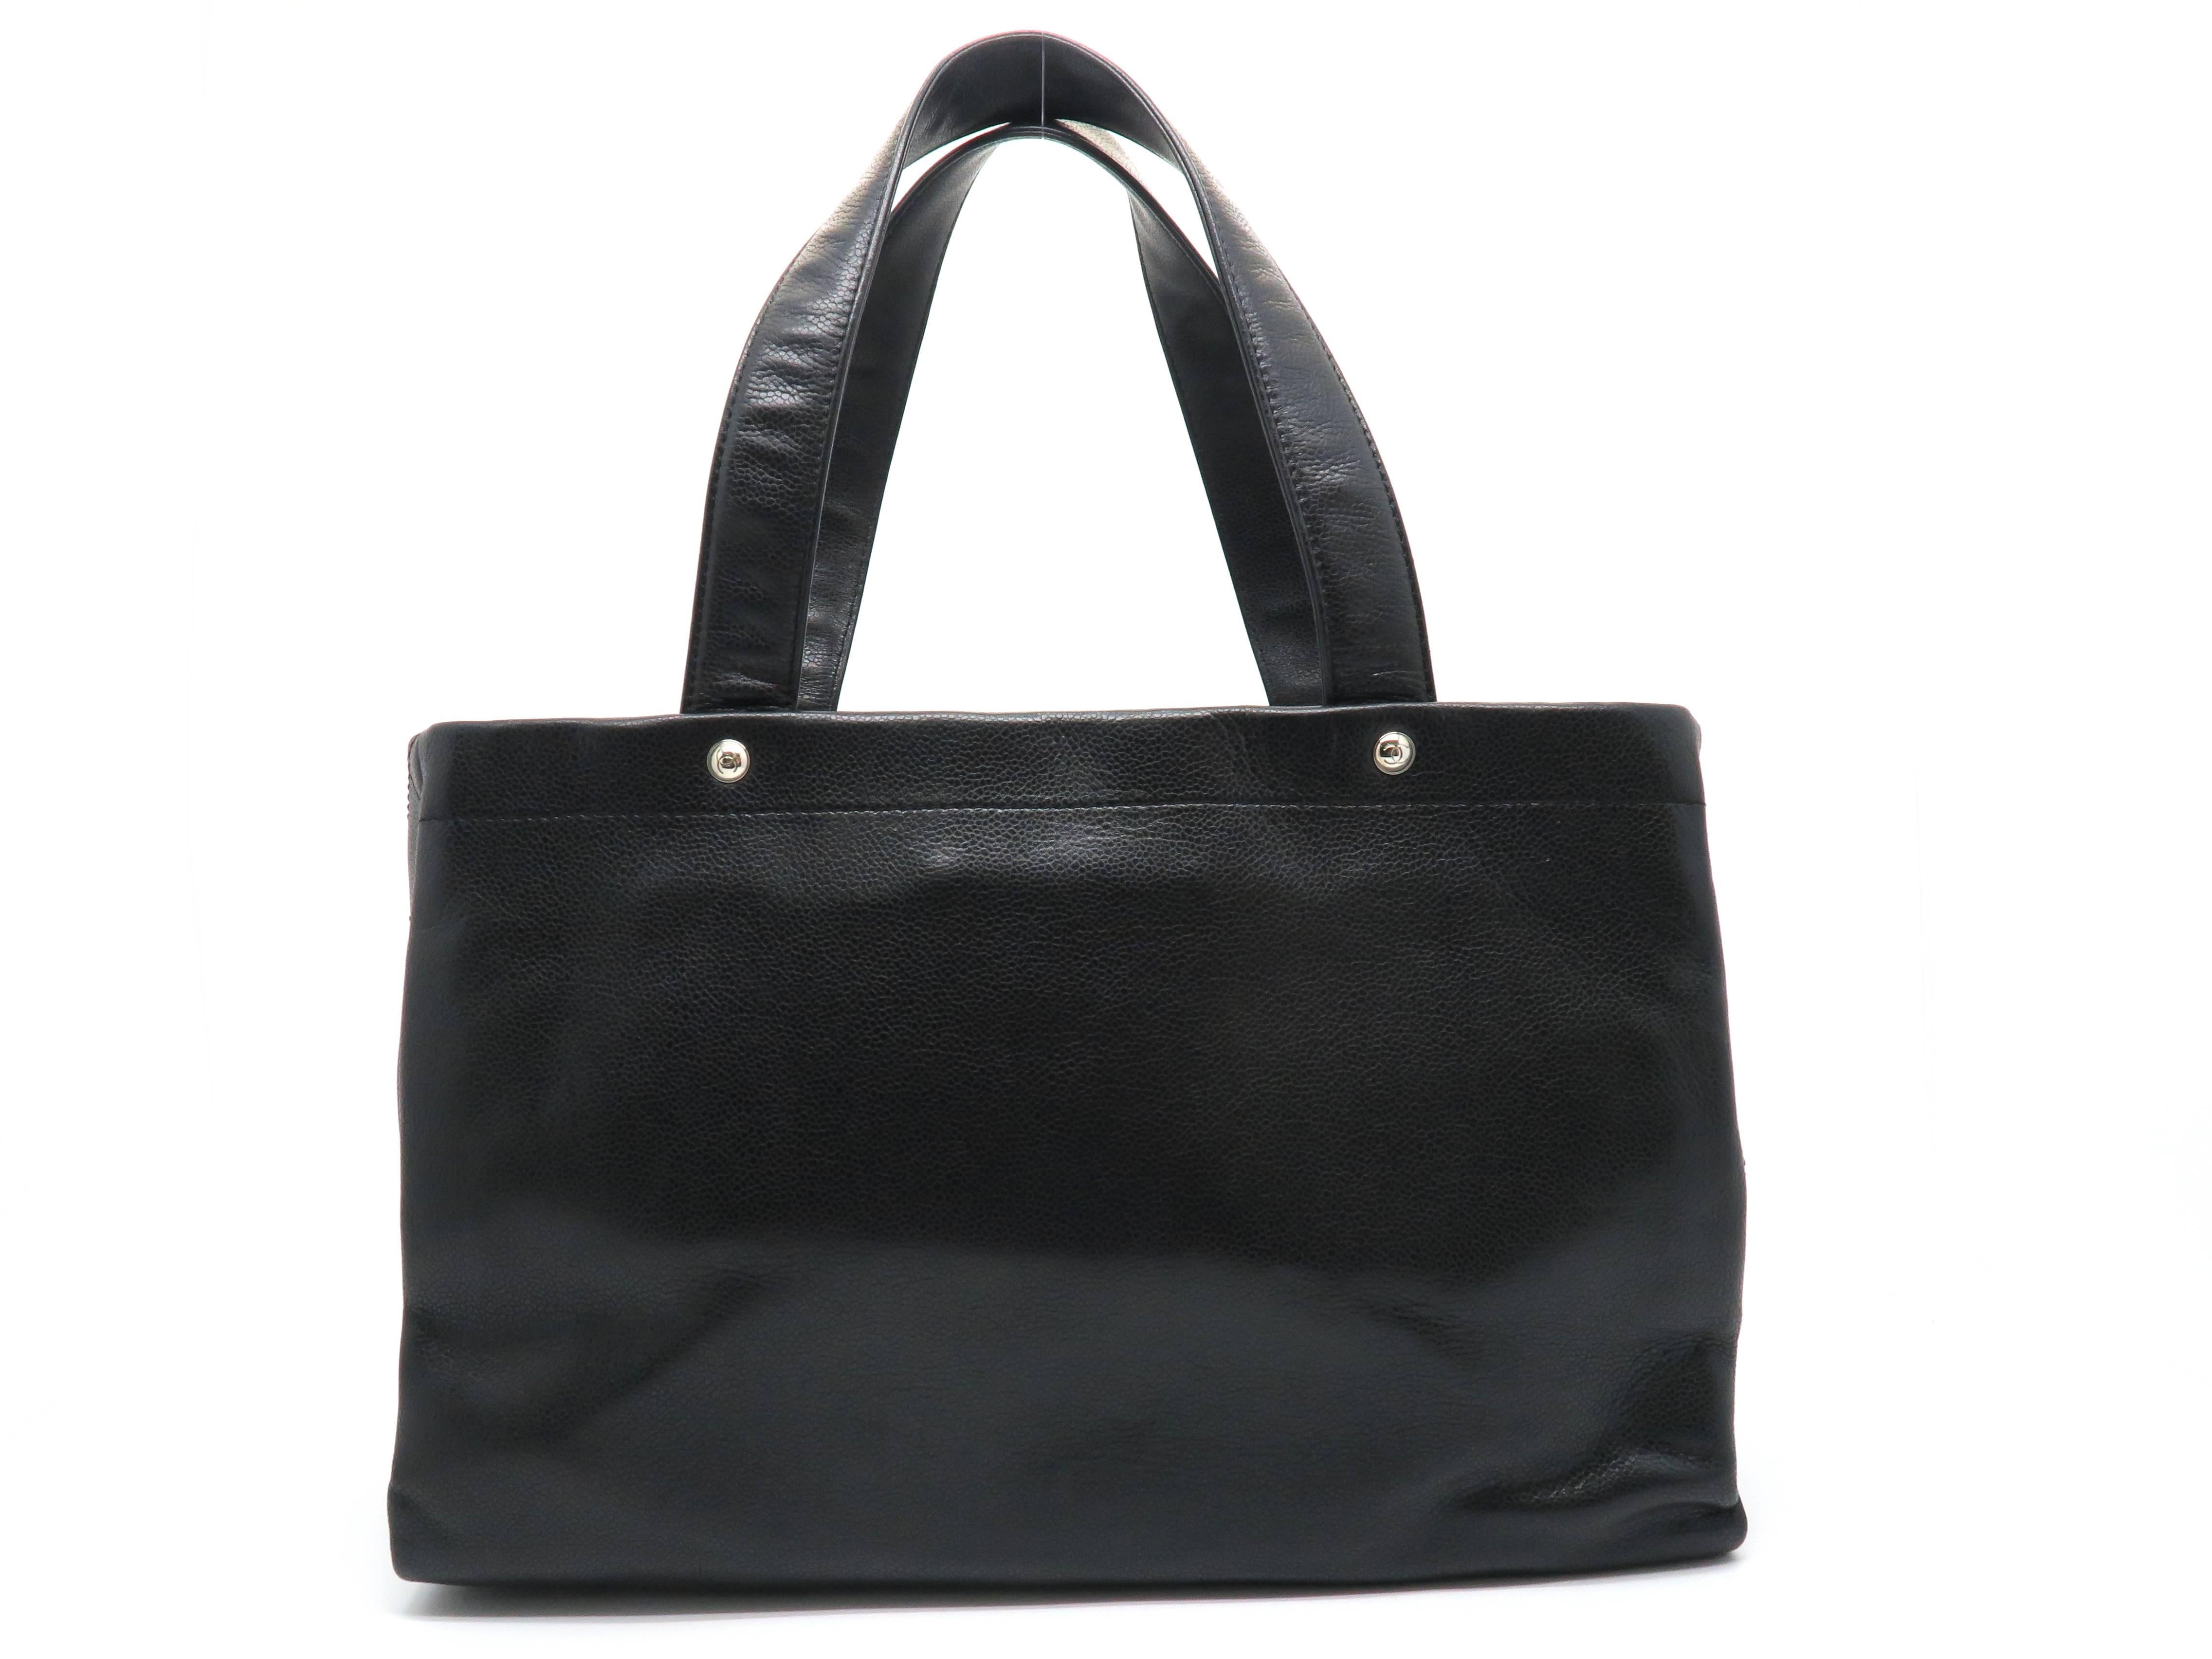 Chanel Black Caviar Leather Tote Bag In Excellent Condition For Sale In Kowloon, HK